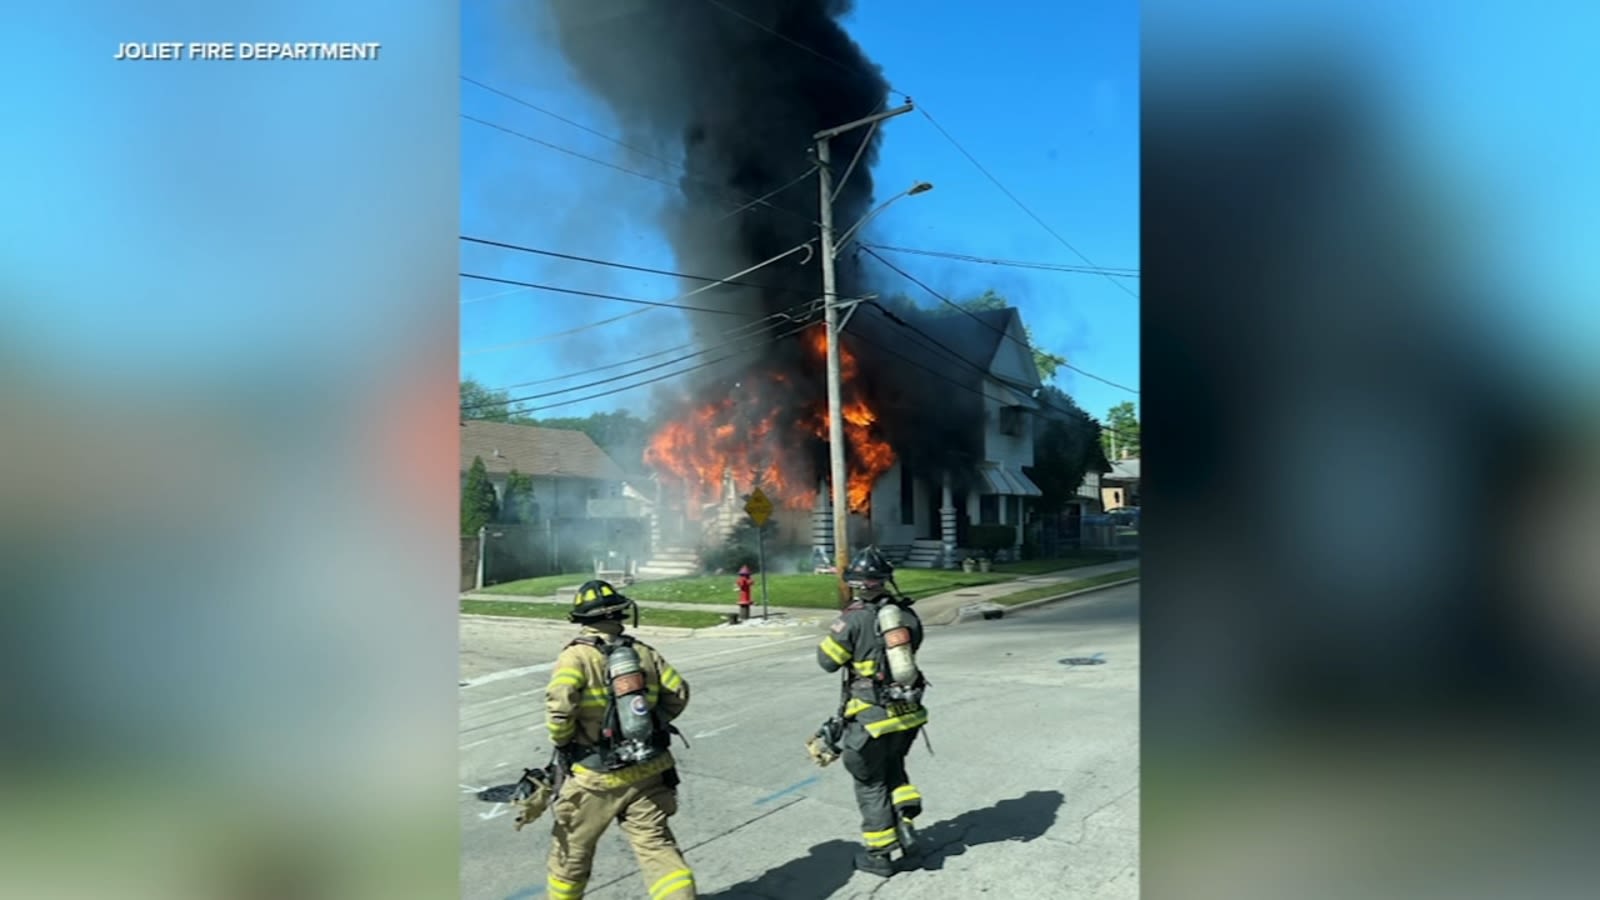 2 dogs injured in large Joliet house fire: officials